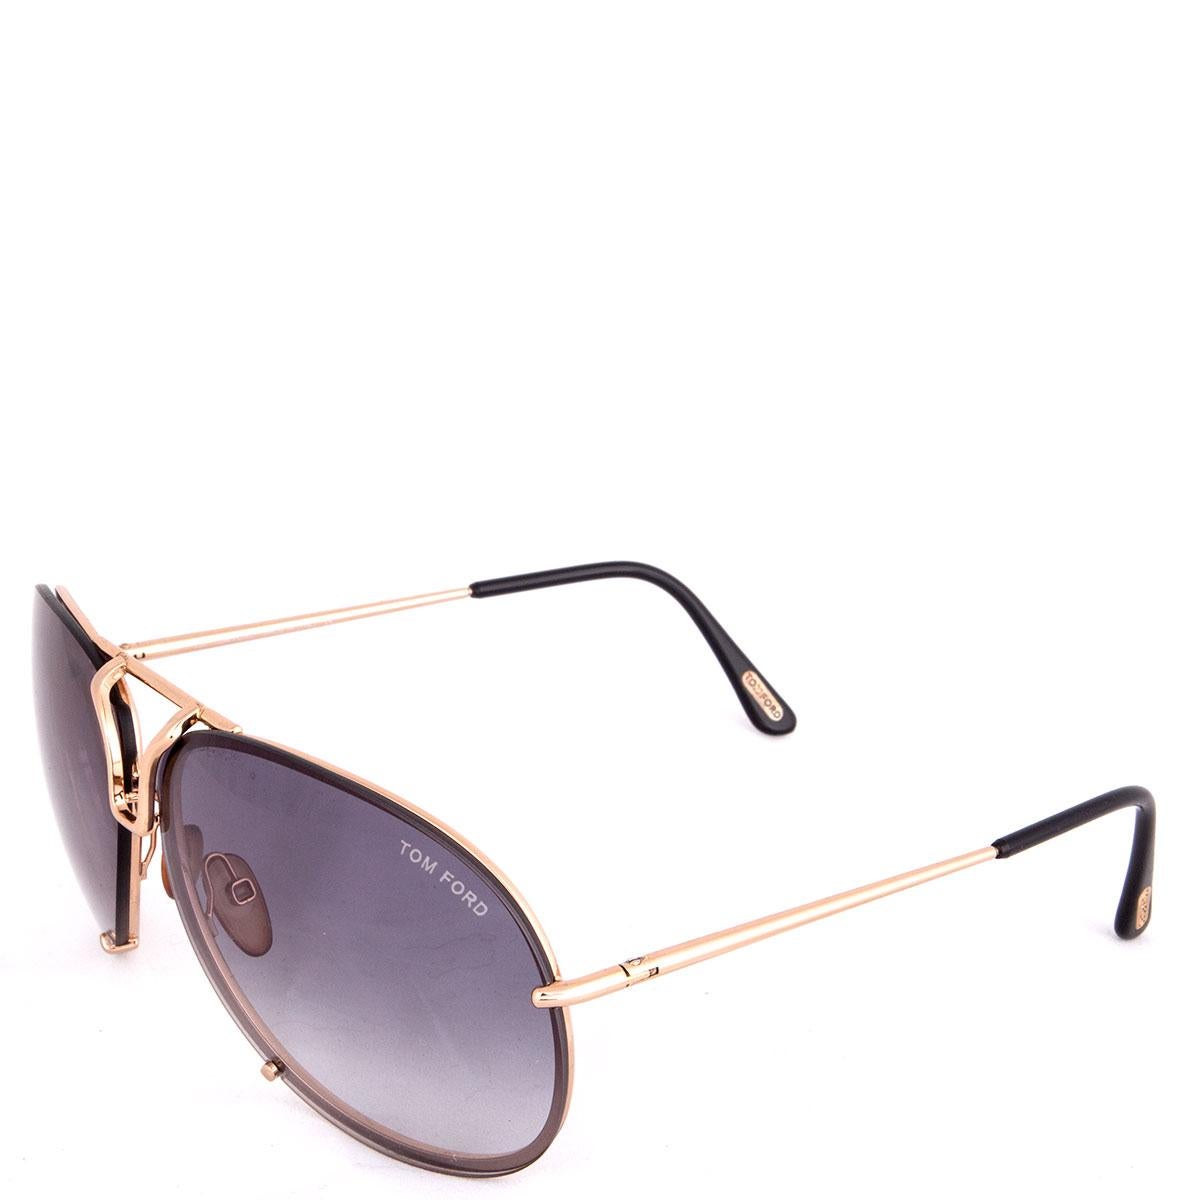 100% authentic Tom Ford Hawkings Aviator sunglasses in black acetate with grey gradient lenses featuring gold-tone metal frame. Have been worn and are in excellent condition. Come with case. 

Model	TF1 772 63-16 130
Width	15cm (5.9in)
Height	6cm